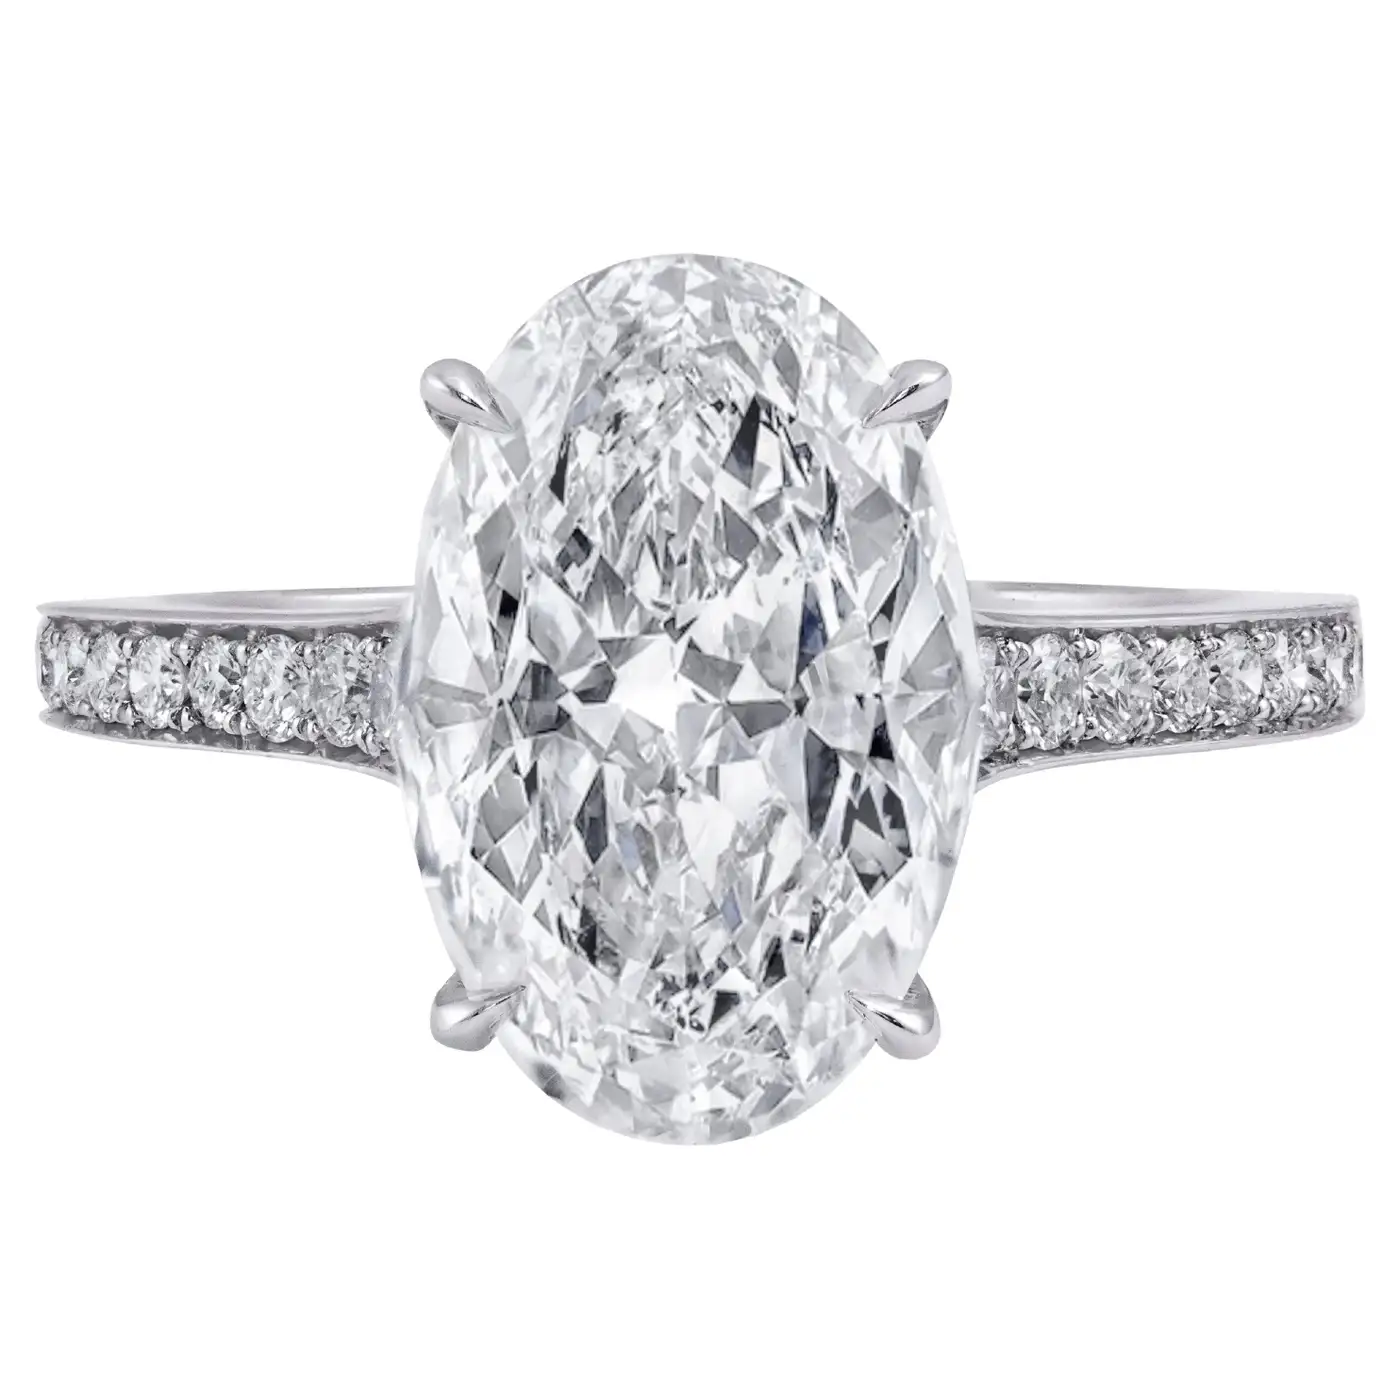 3.0-Carats-Oval-Cut-Diamond-Engagement-Ring-with-side-stones-GIA-Certified-1.webp